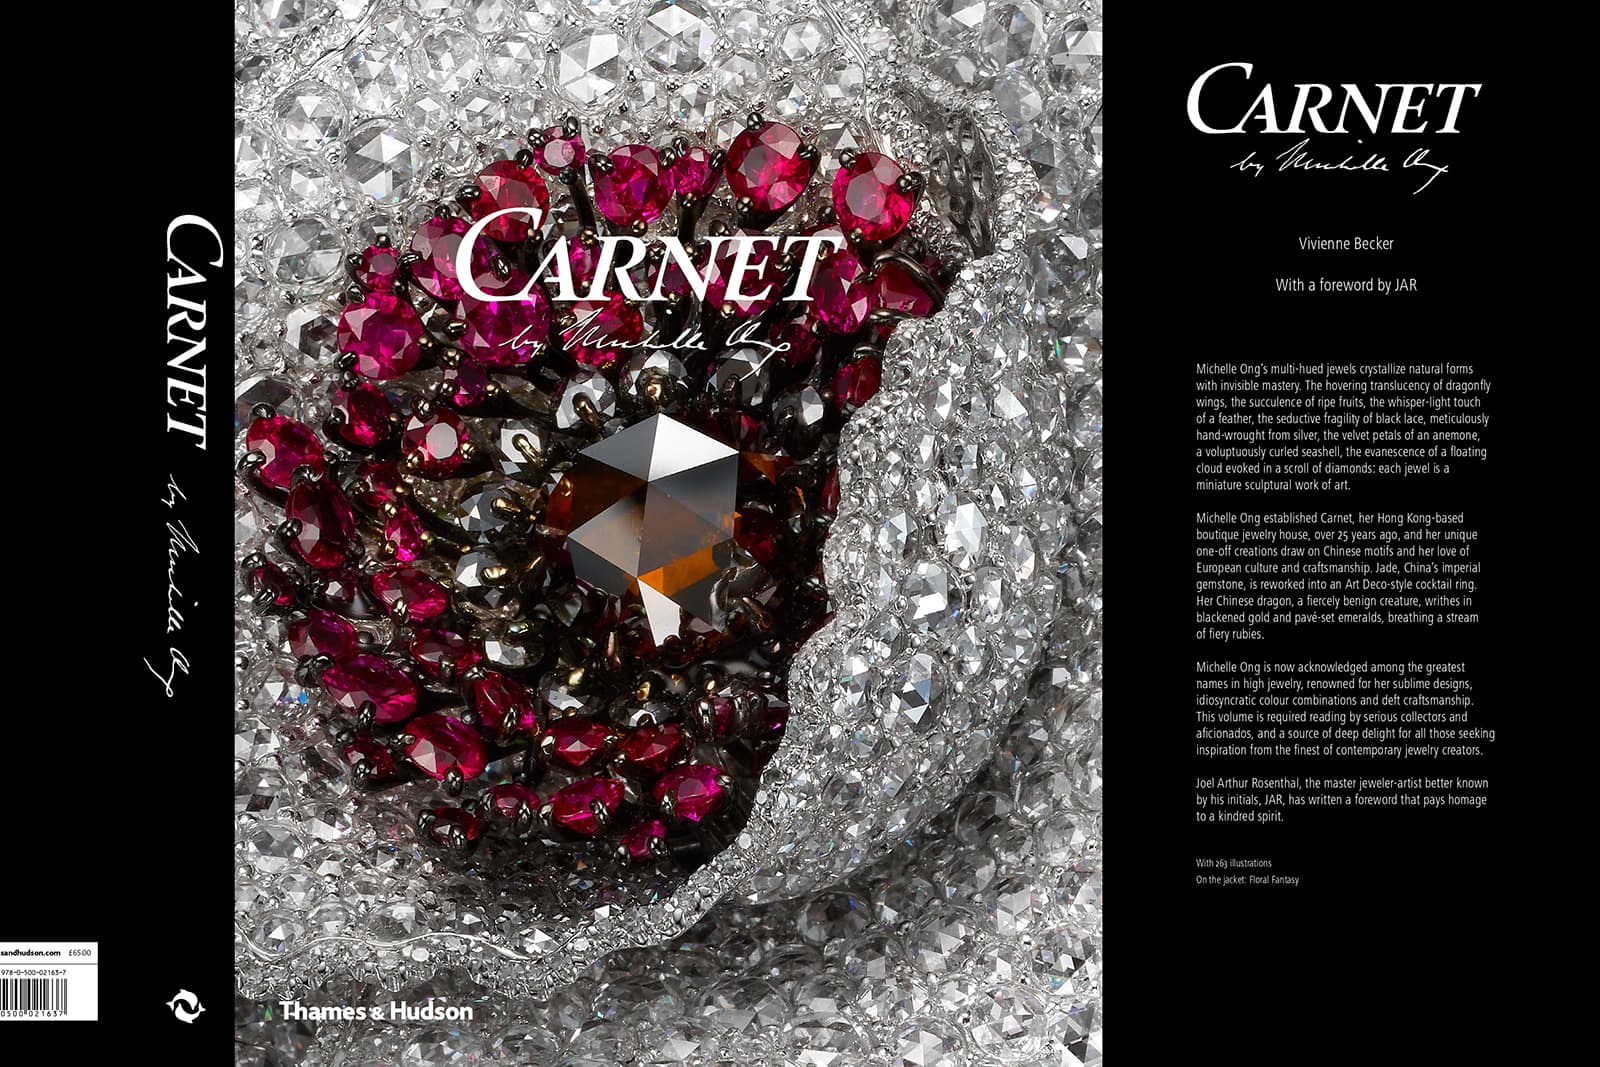 'Carnet by Michelle Ong' book by Vivienne Becker